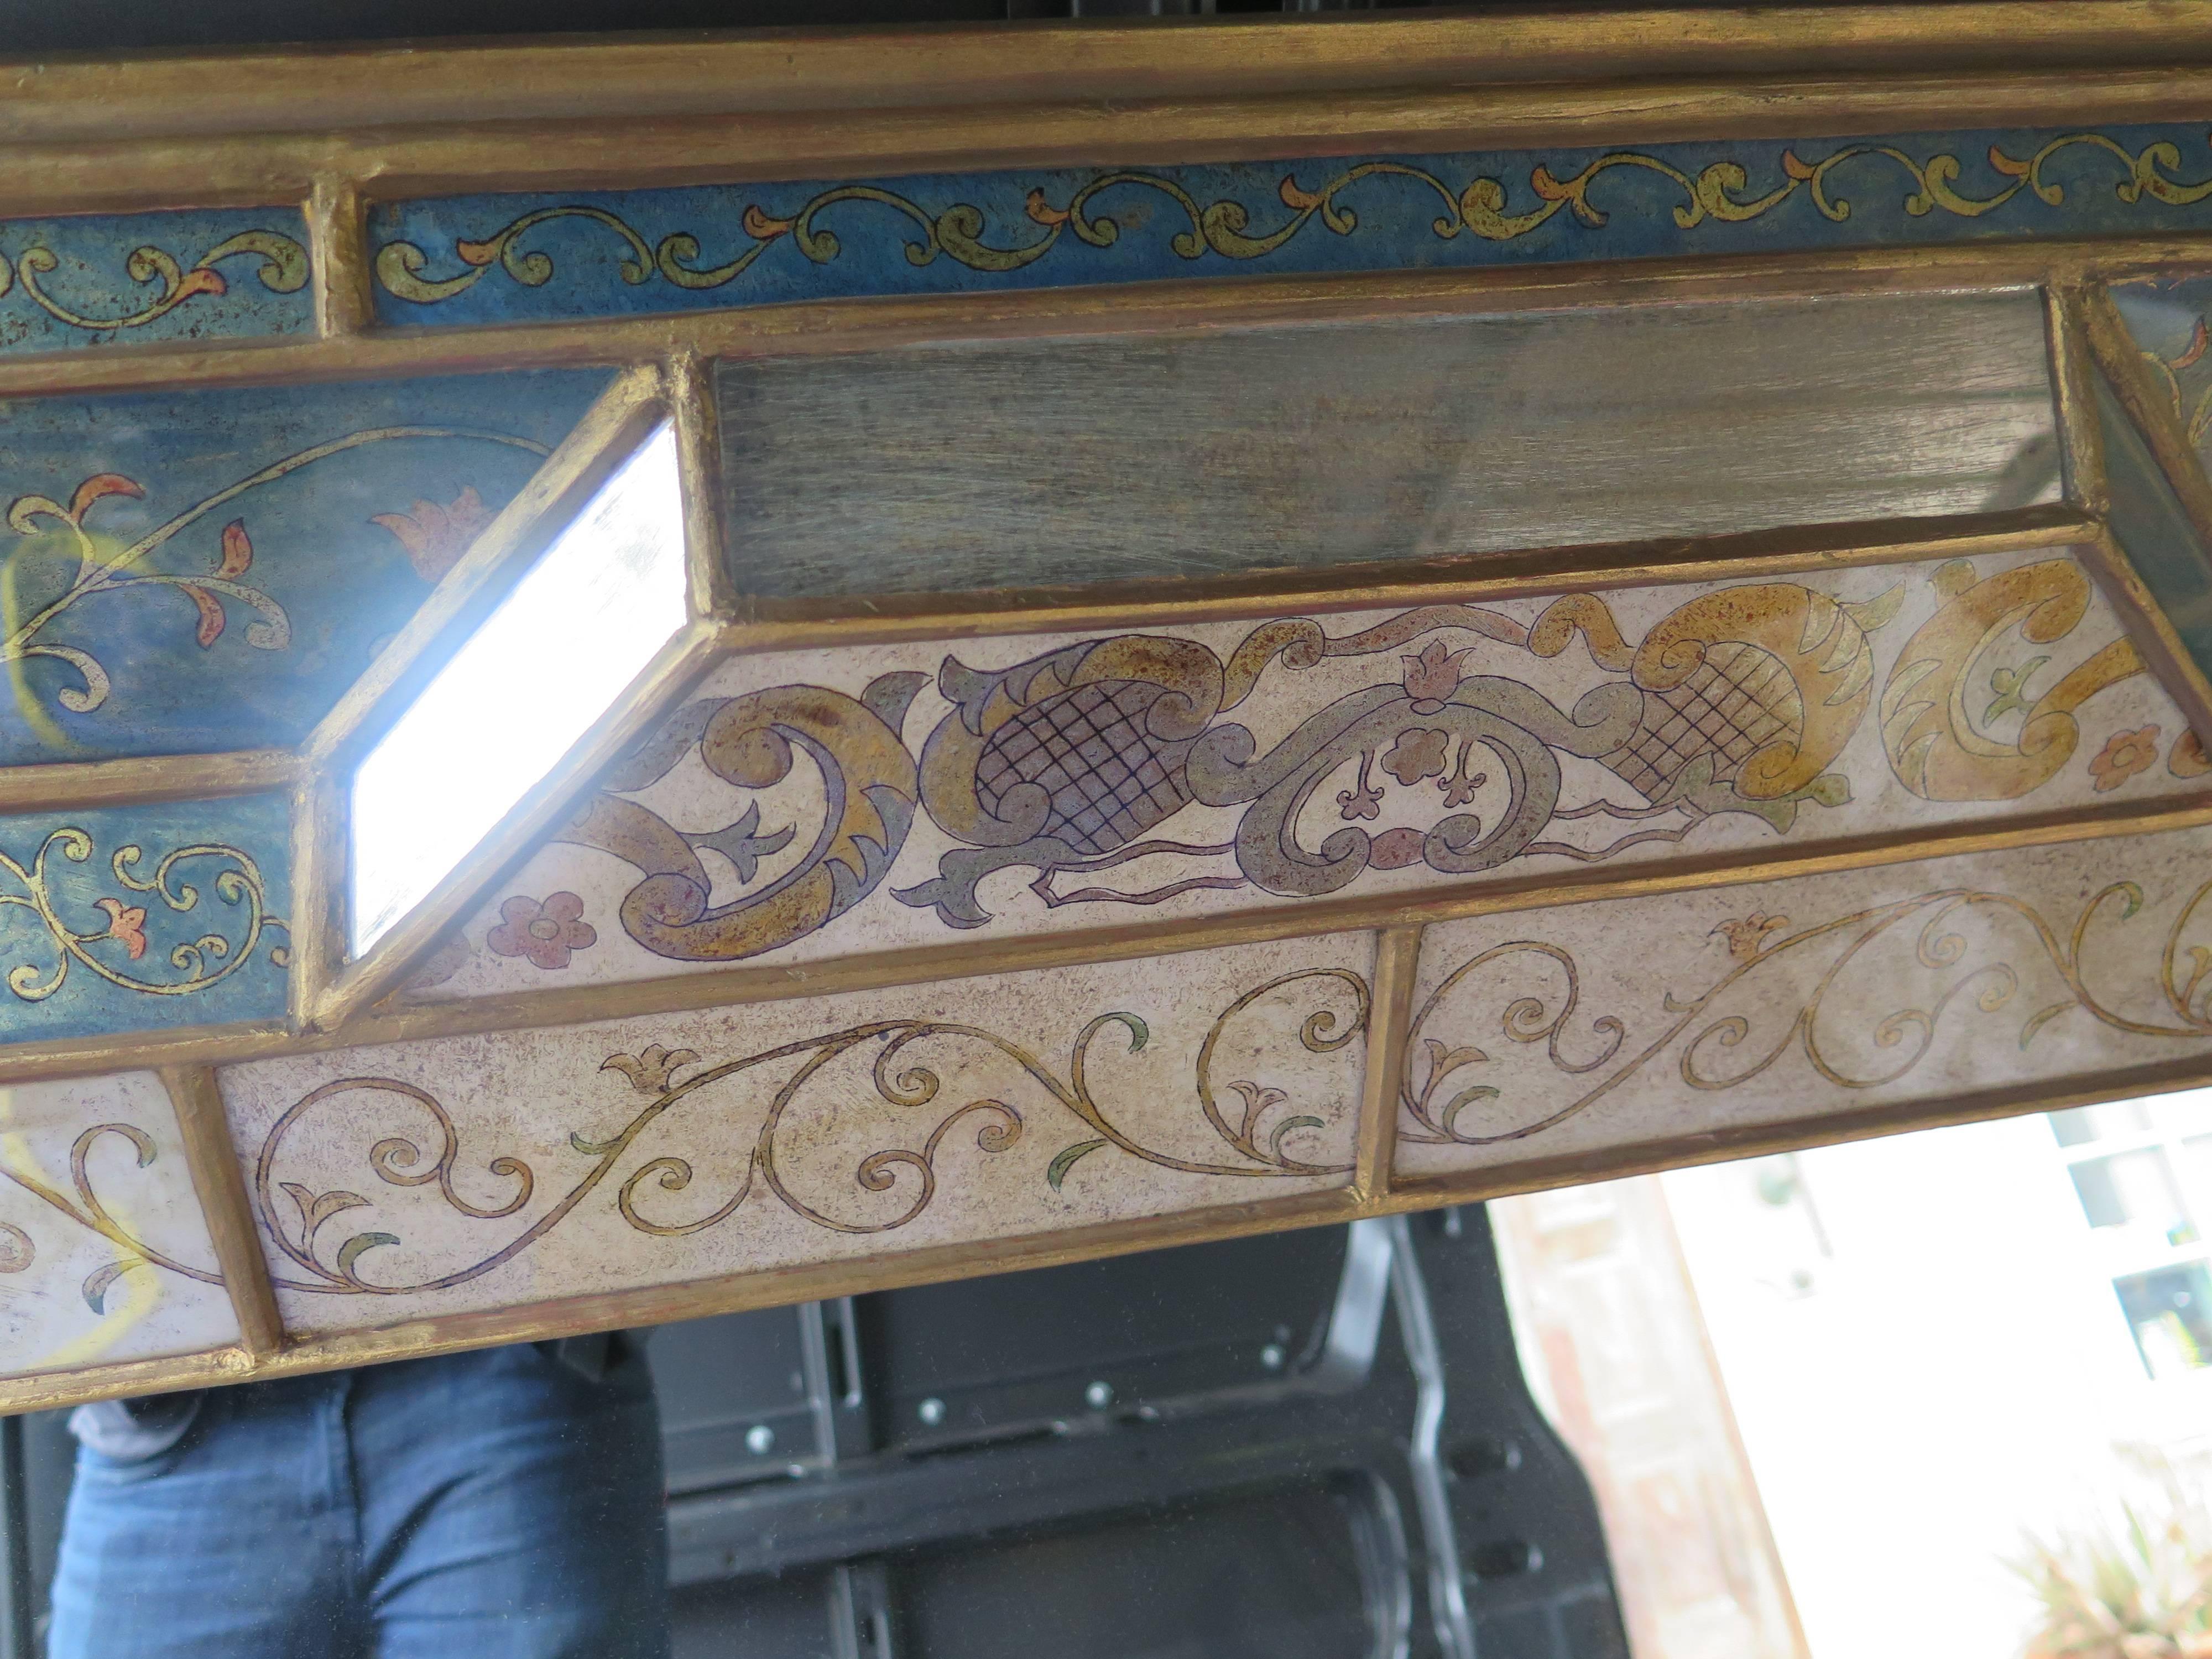 Large painted glass venetian style mirror with gilded edges.